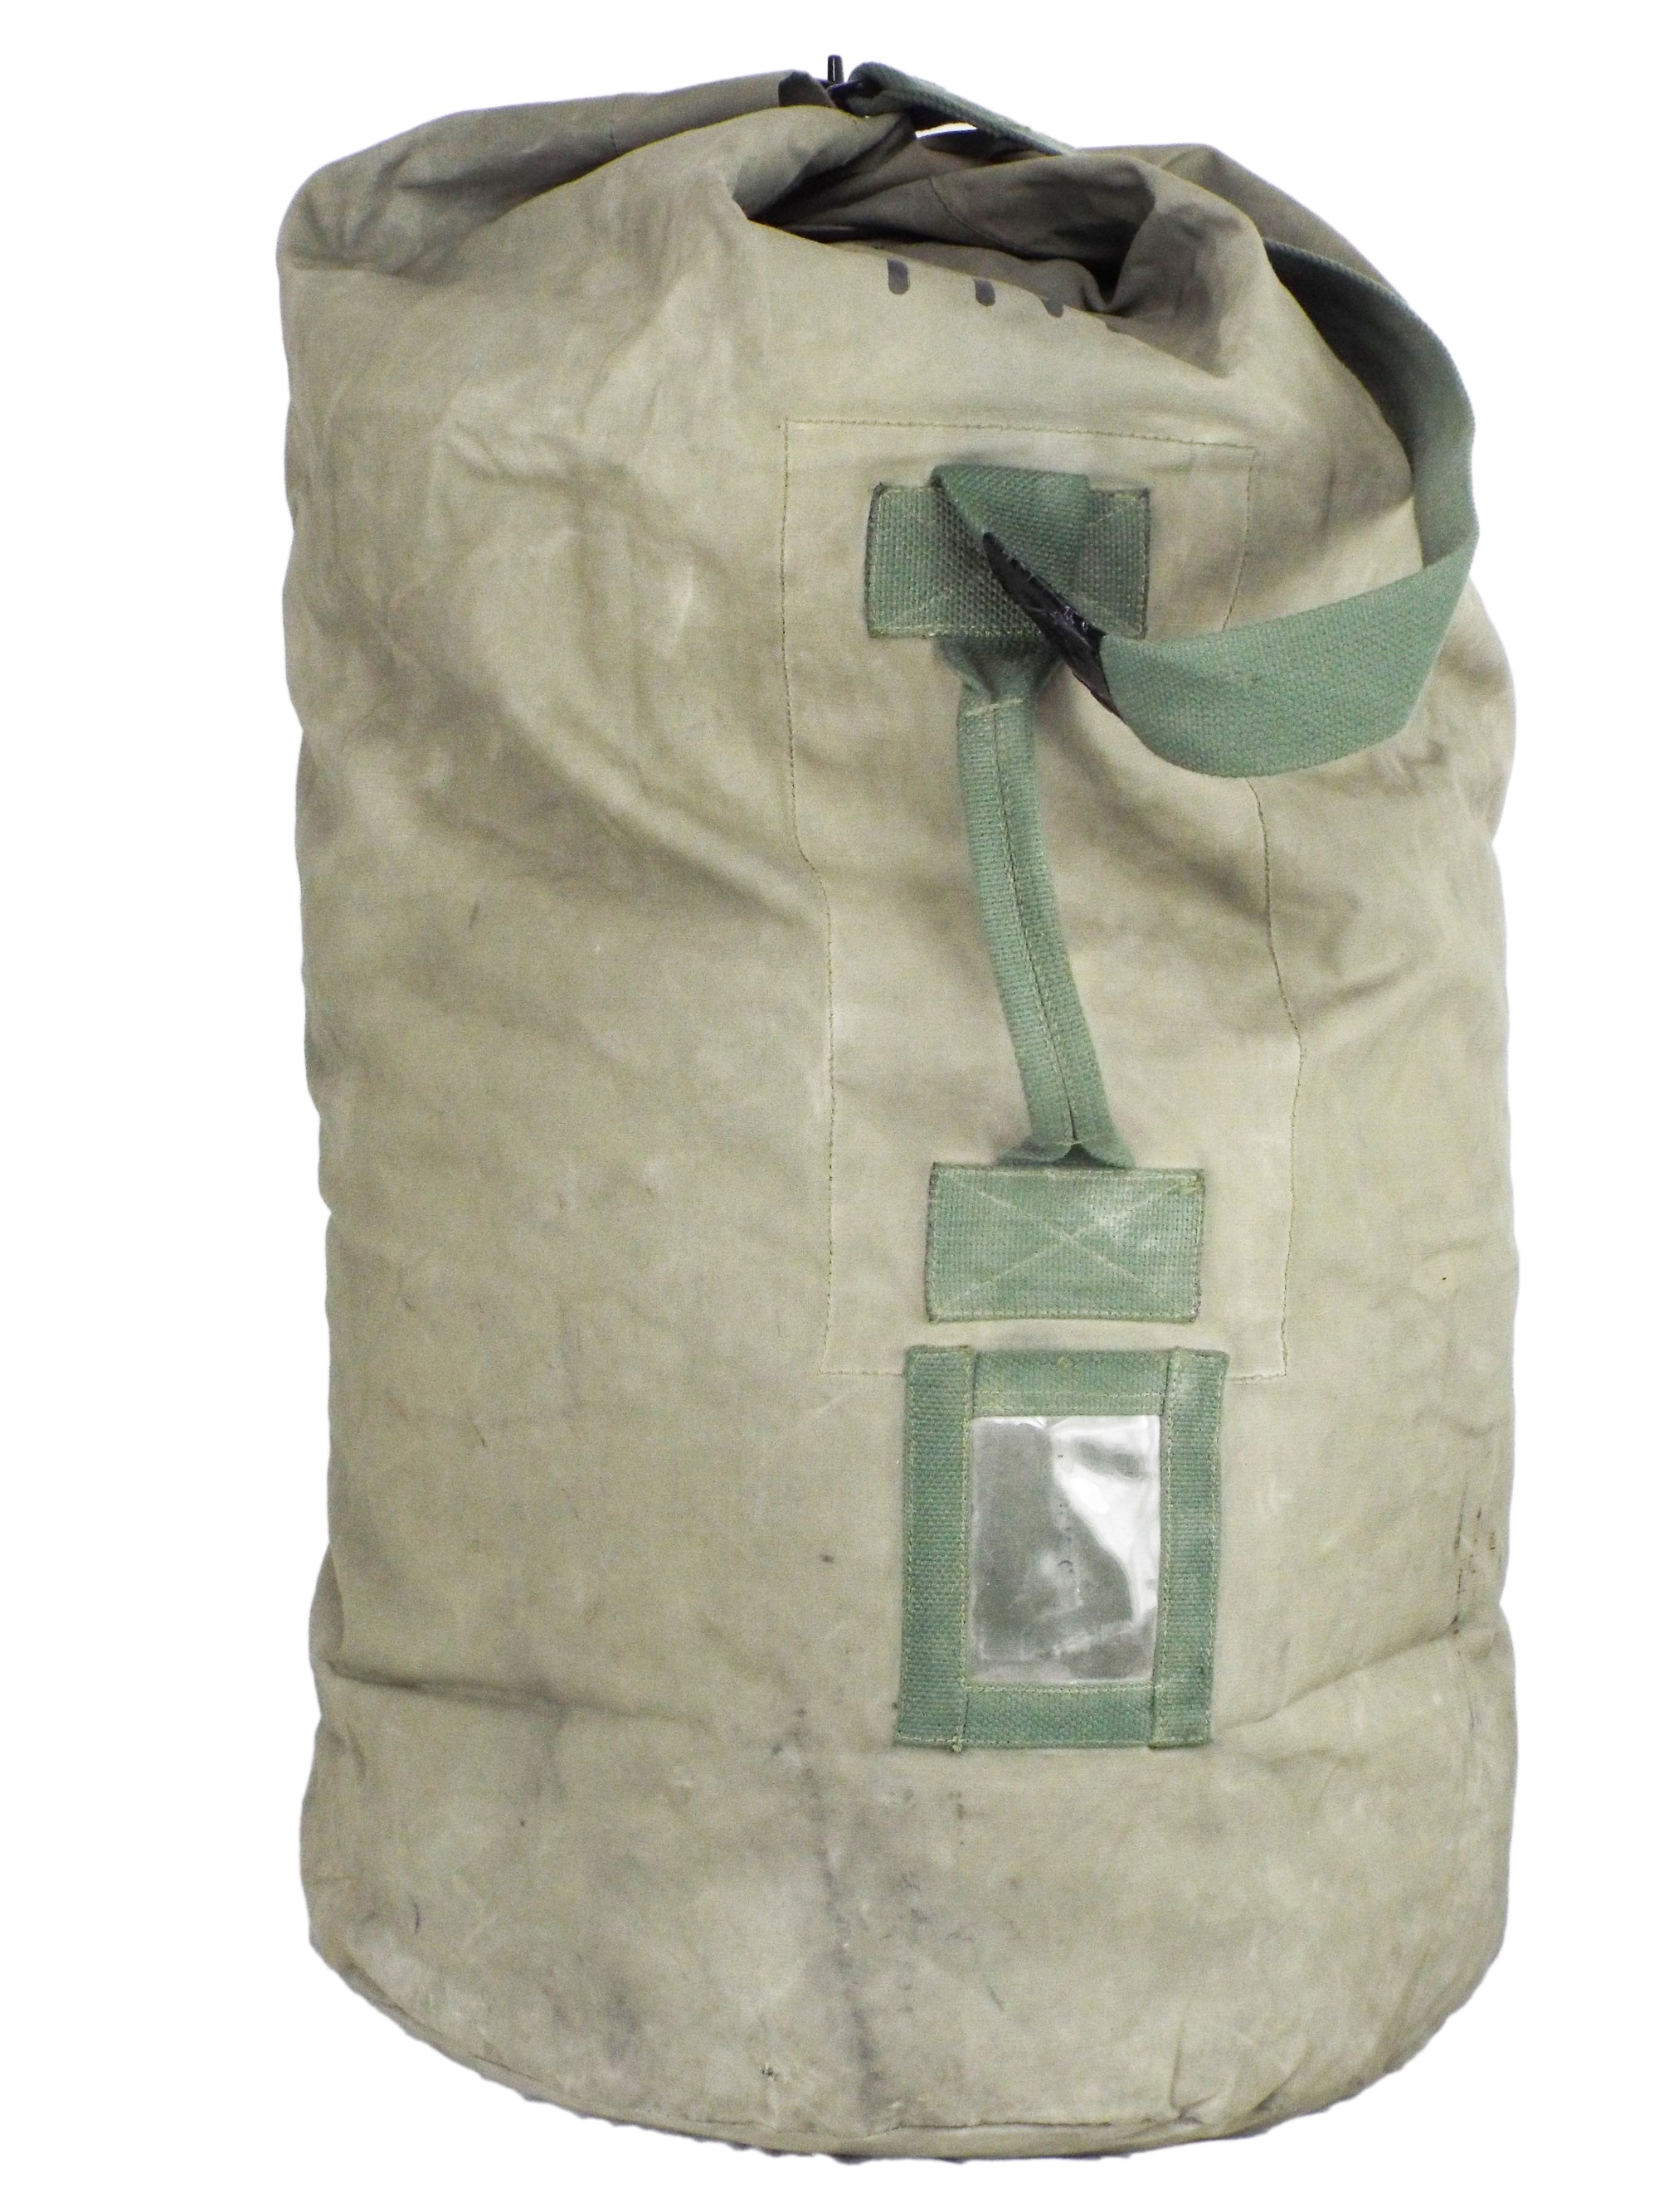 Dutch Army Large Kit Bag - 80 litre capacity approximately